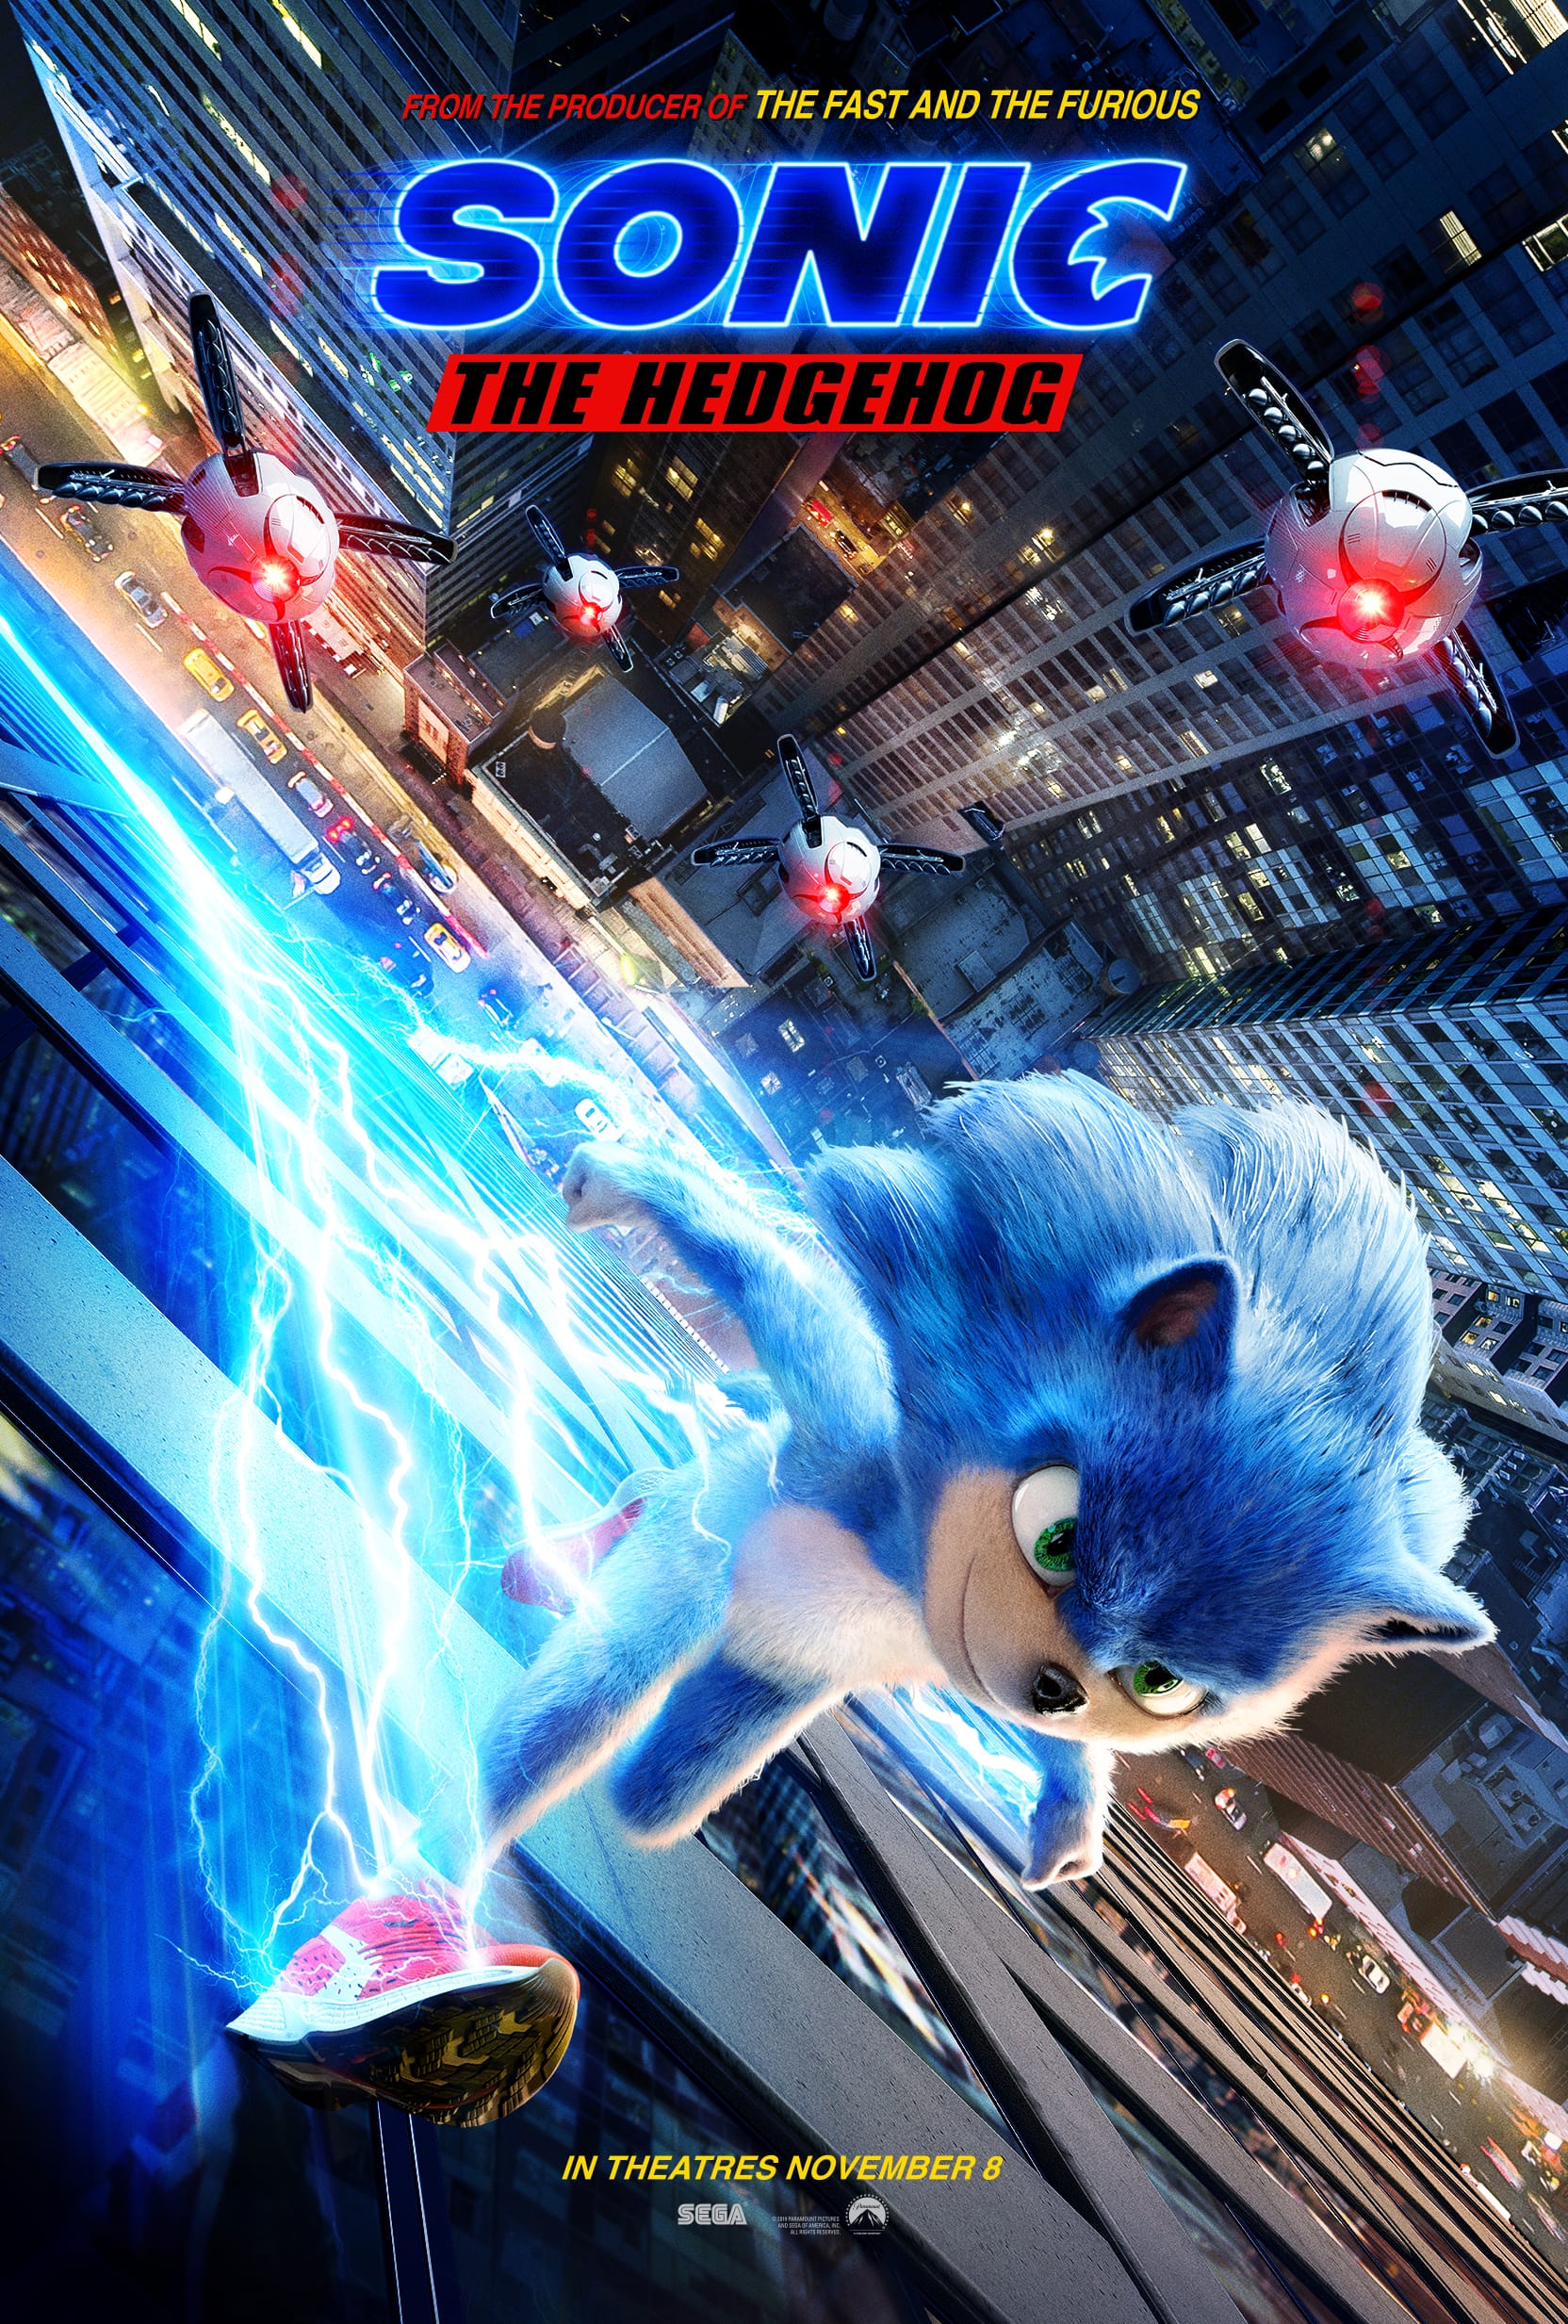 He’s a whole new speed of hero. The beloved Sonic is coming to the big screen in a live action movie, keeping intact what generations of people love most about the character – his mischievous streak and sarcastic personality. The new SONIC THE HEDGEHOG movie will be in theatres this November.